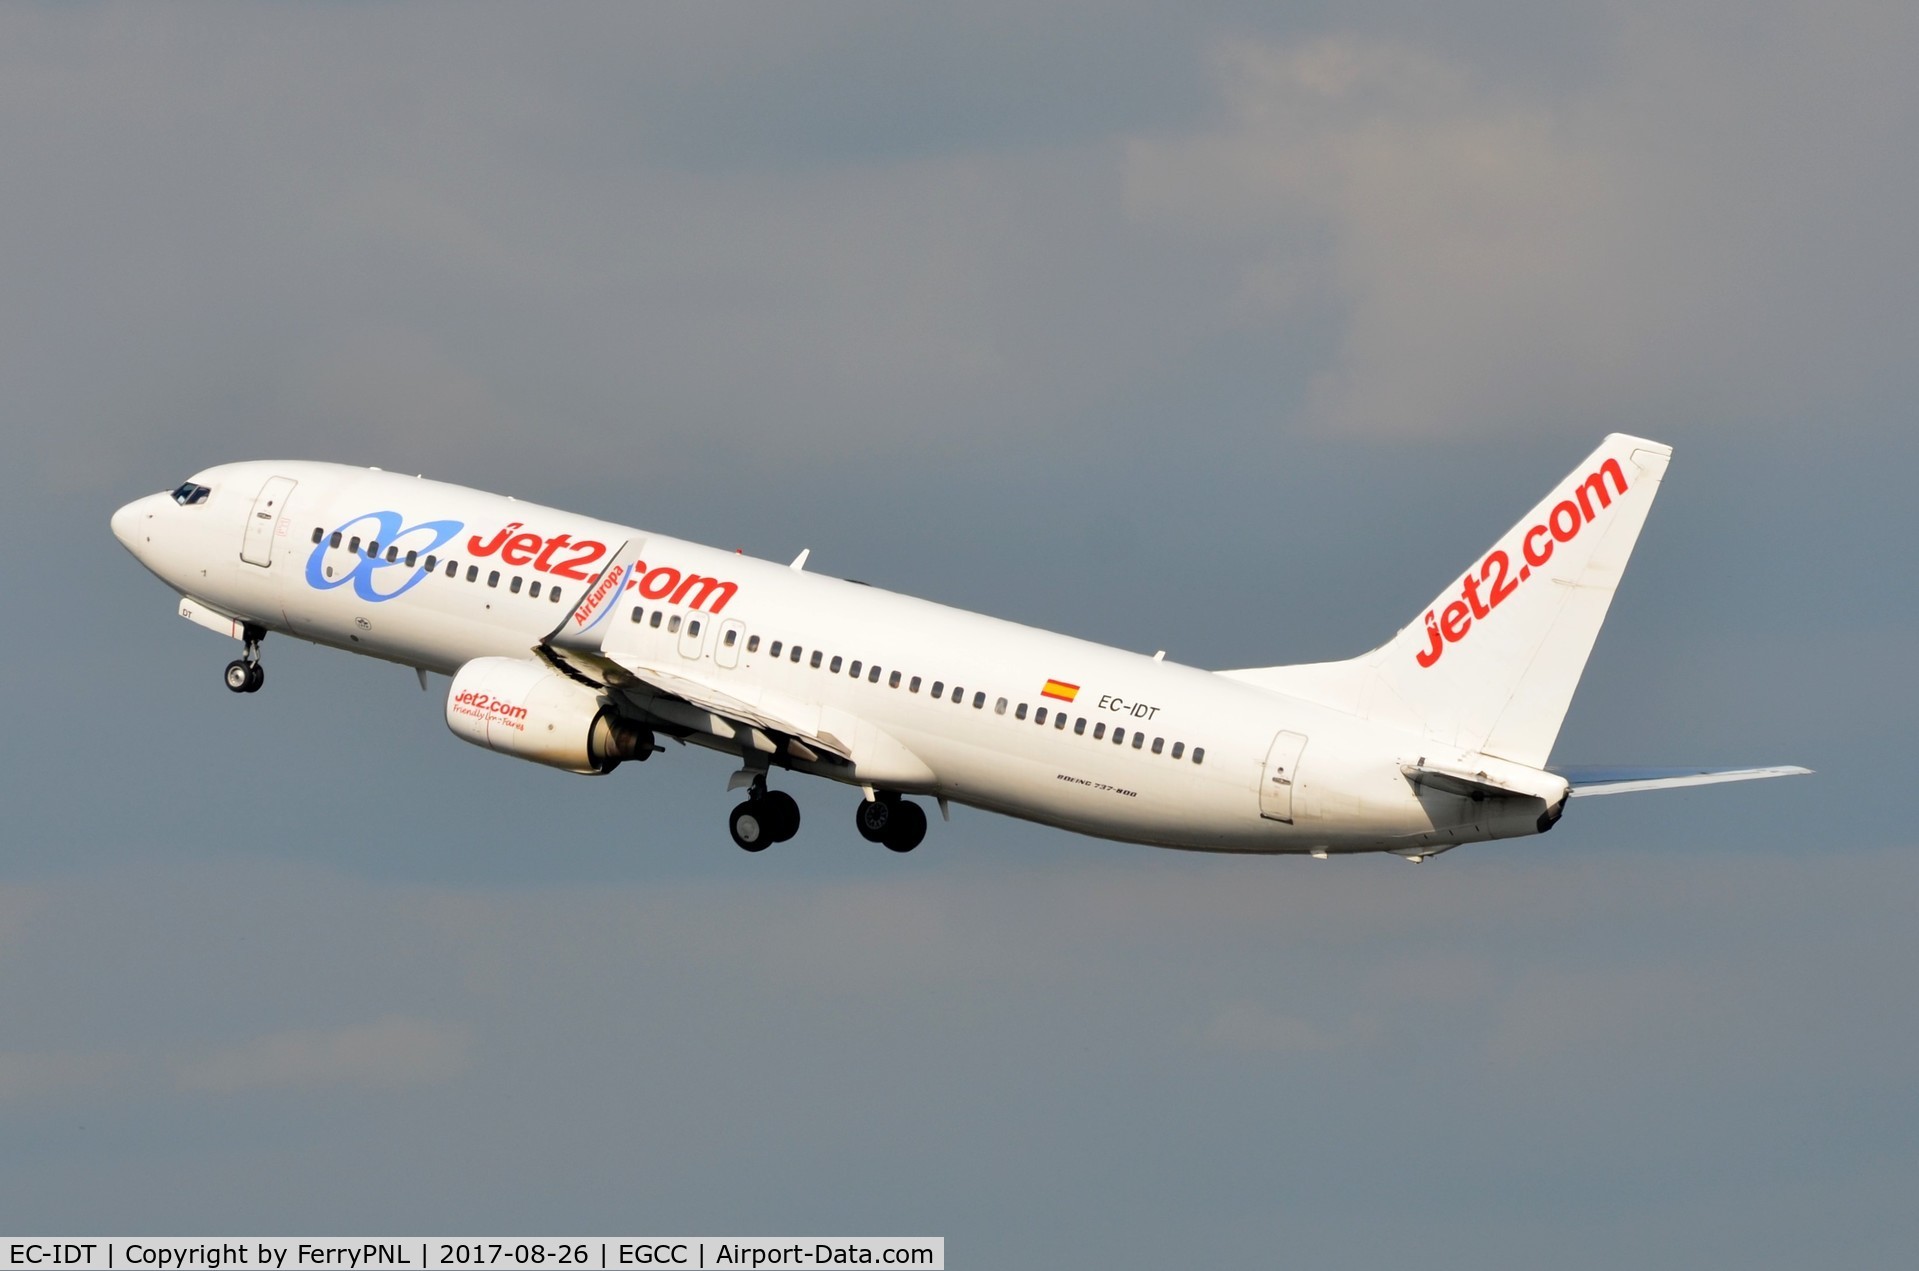 EC-IDT, 2002 Boeing 737-86Q C/N 30281, Short lease of Air Europa B738 to Jet2.